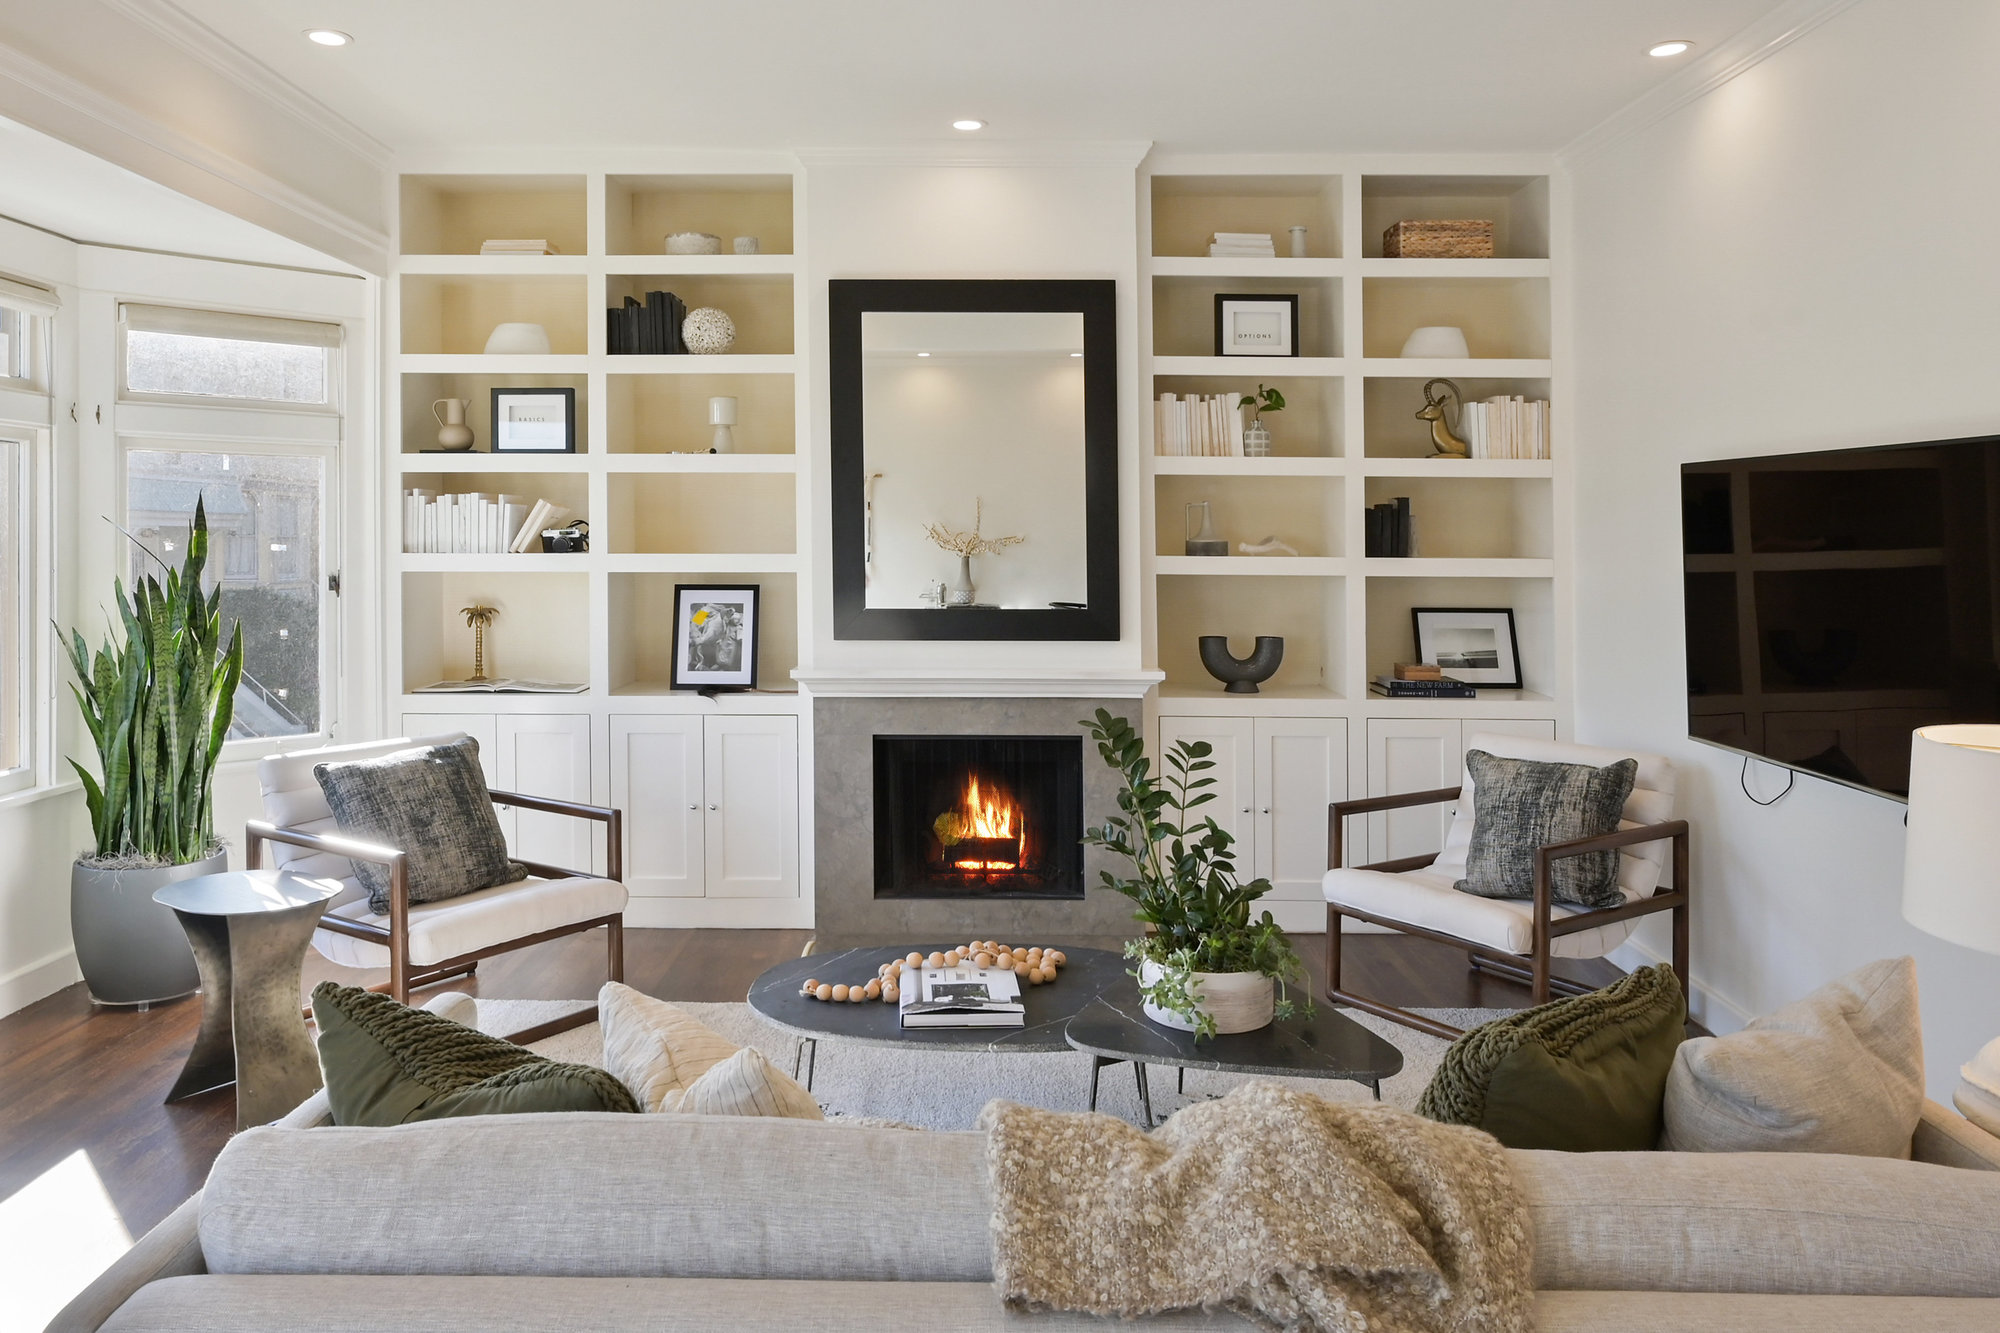 View of the living room at 39 Delmar, showing a fireplace and white built-in cabinets